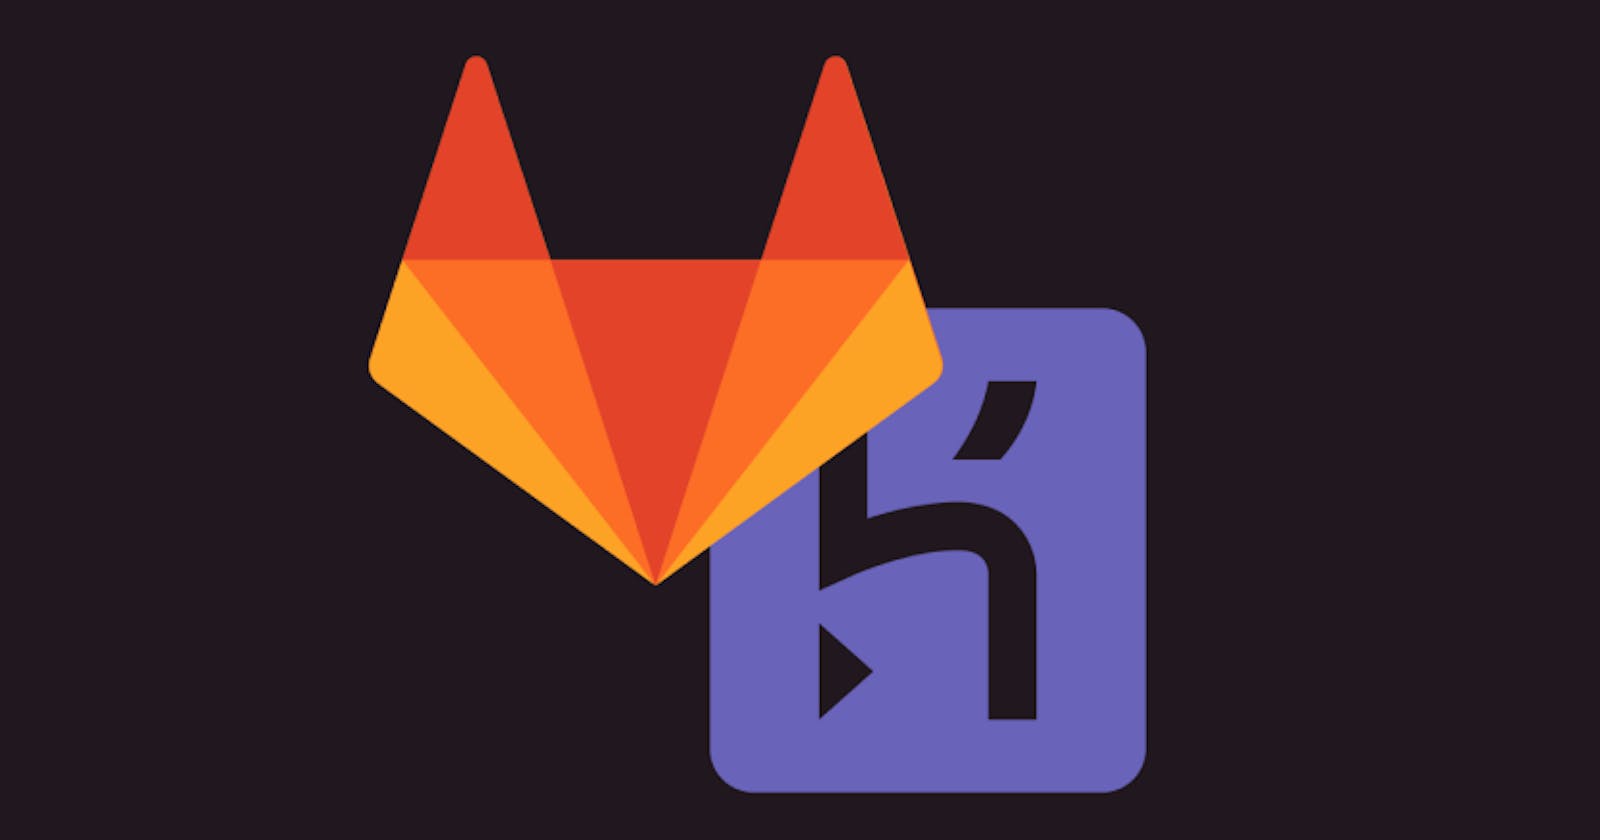 Deploying Gitlab Review Apps with Heroku.